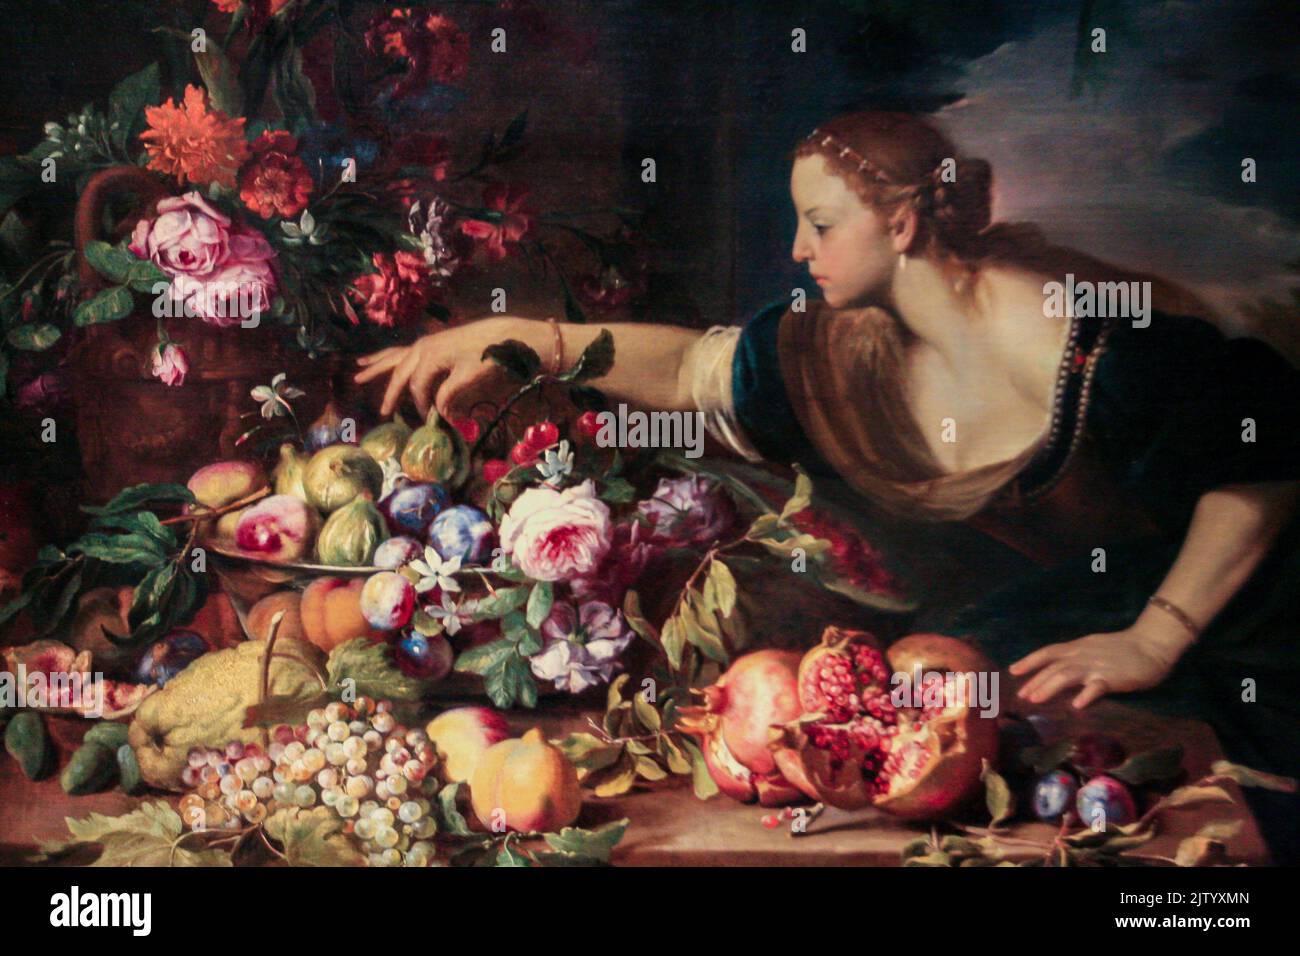 Woman Grasping Fruits by Abraham Brueghel, School of Southern Netherlands c1669, Louvre Museum, Paris, France - AUG 2019 Stock Photo